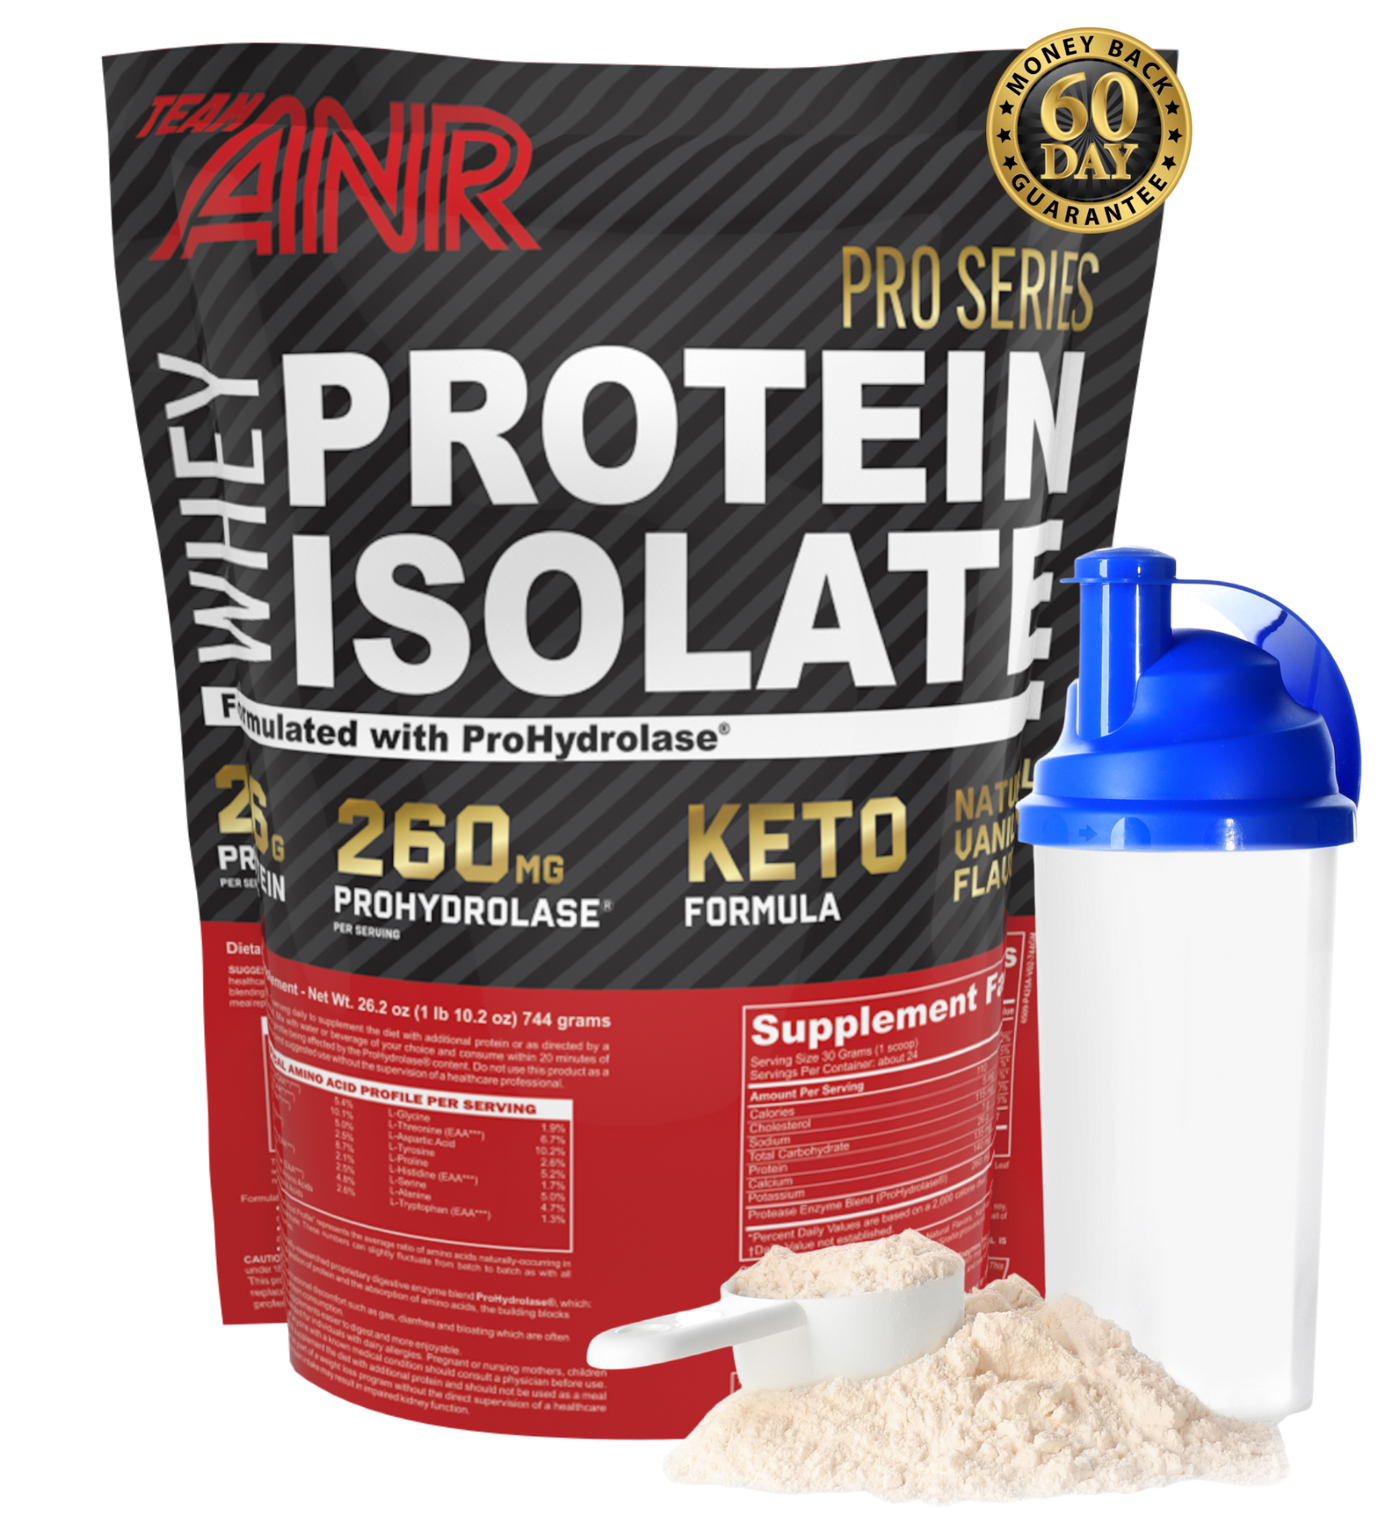 Pro Series Whey Protein Isolate Fortified with ProHydrolase® - TeamANR